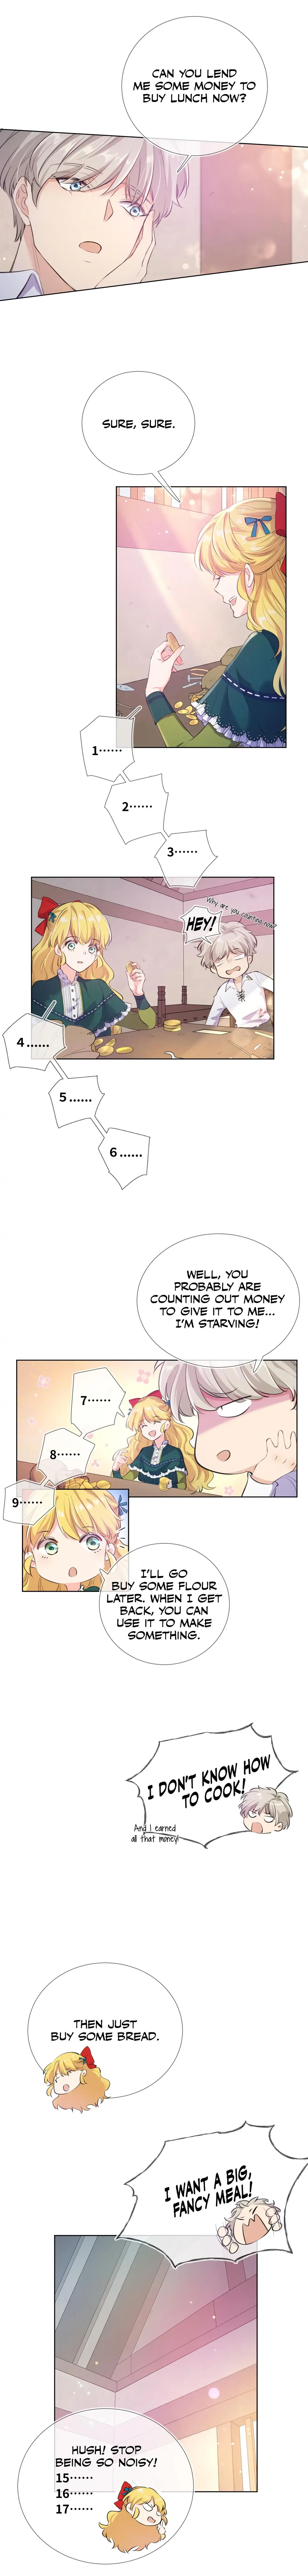 Olive's Plan To Get Rich Chapter 3